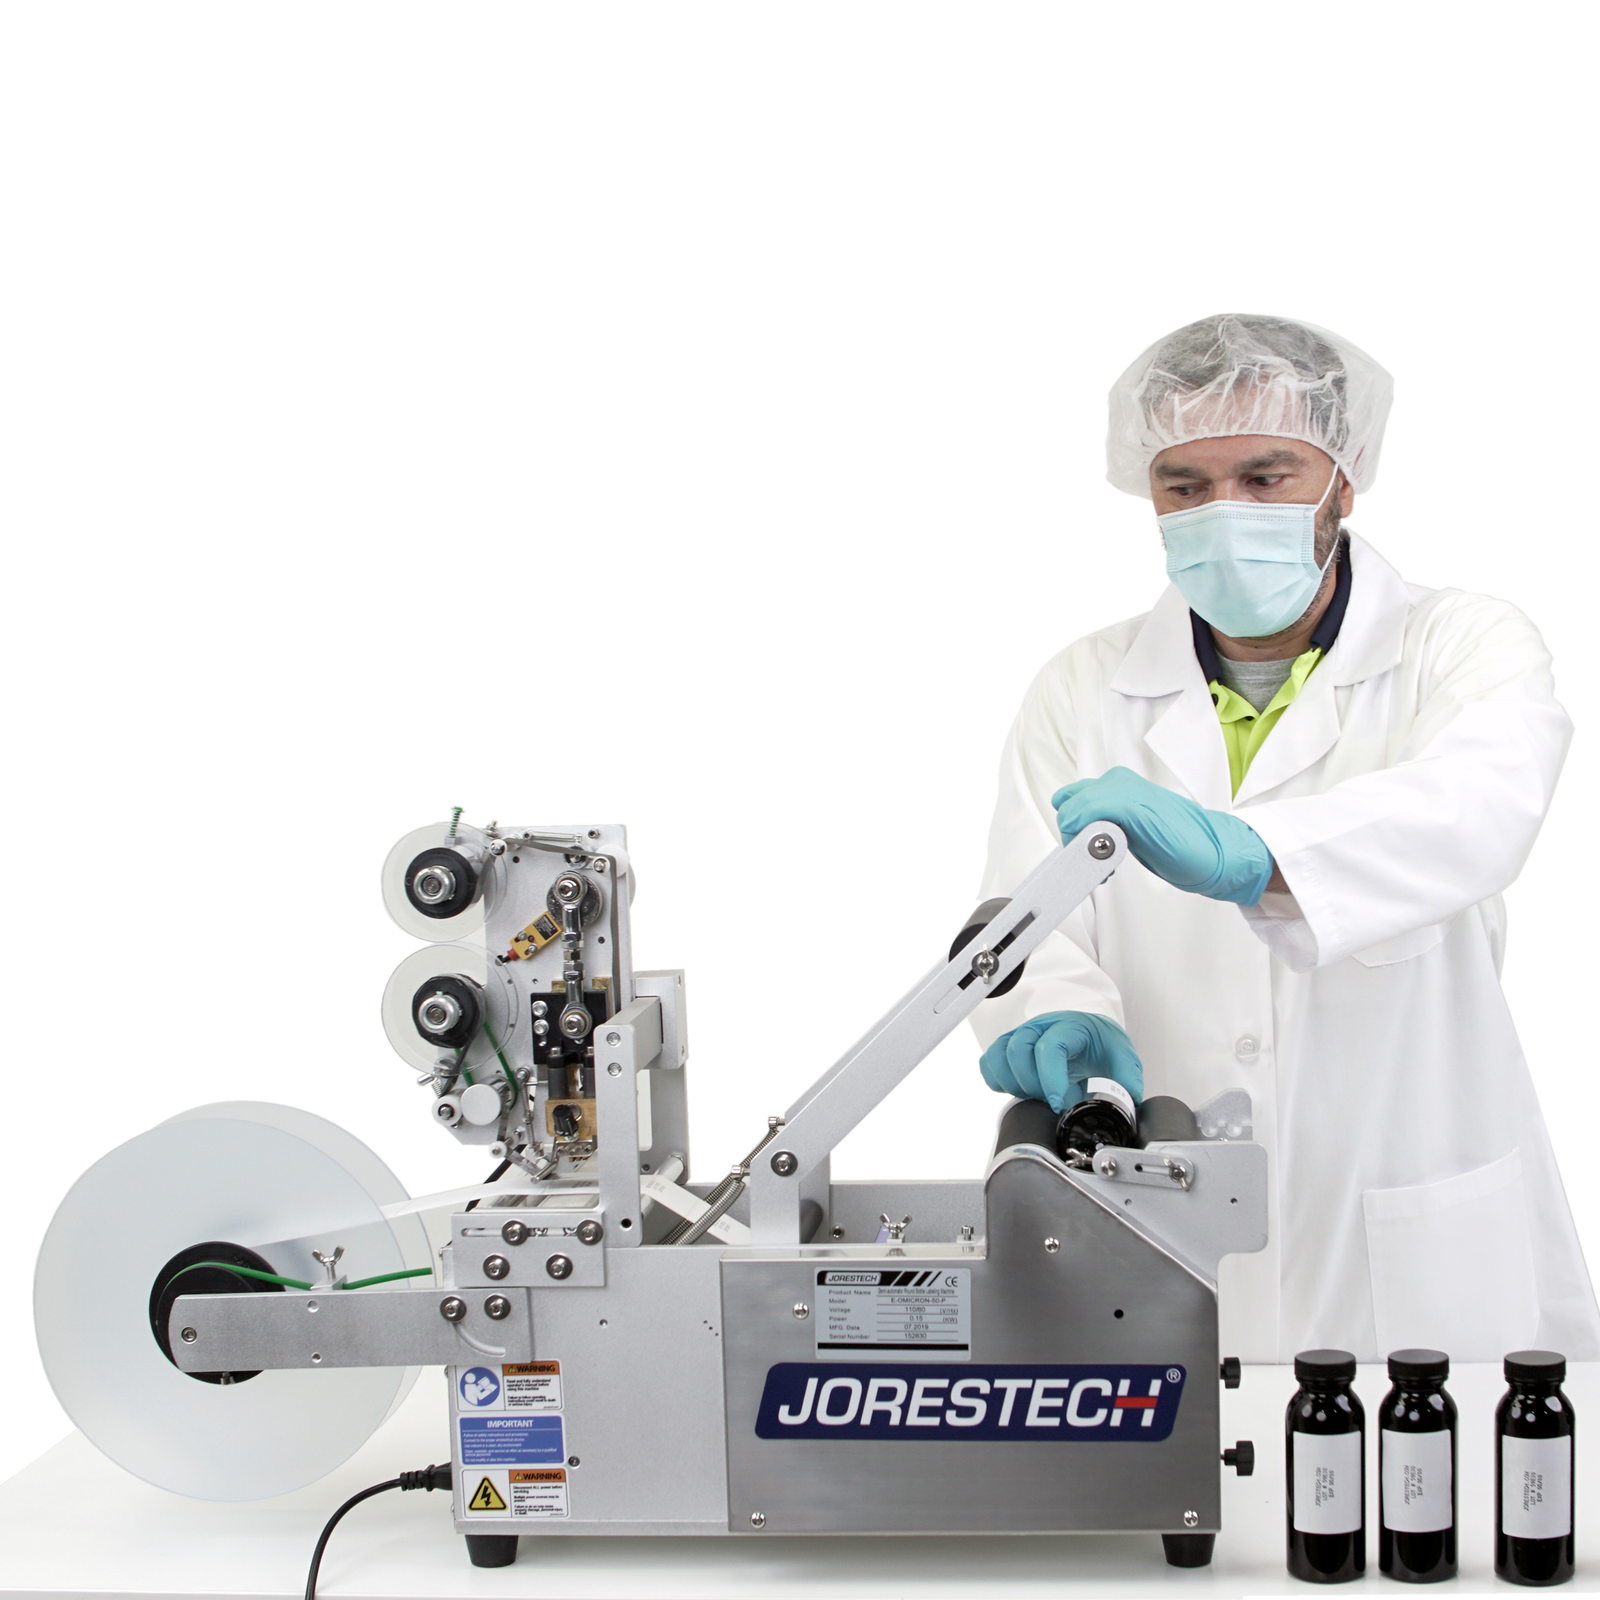 A man wearing personal protection equipment. He is operating the JORES TECHNOLOGIES® semi automatic labeling machine by applying labels to round containers. A set of 3 bottles is shown with printed labels with written information